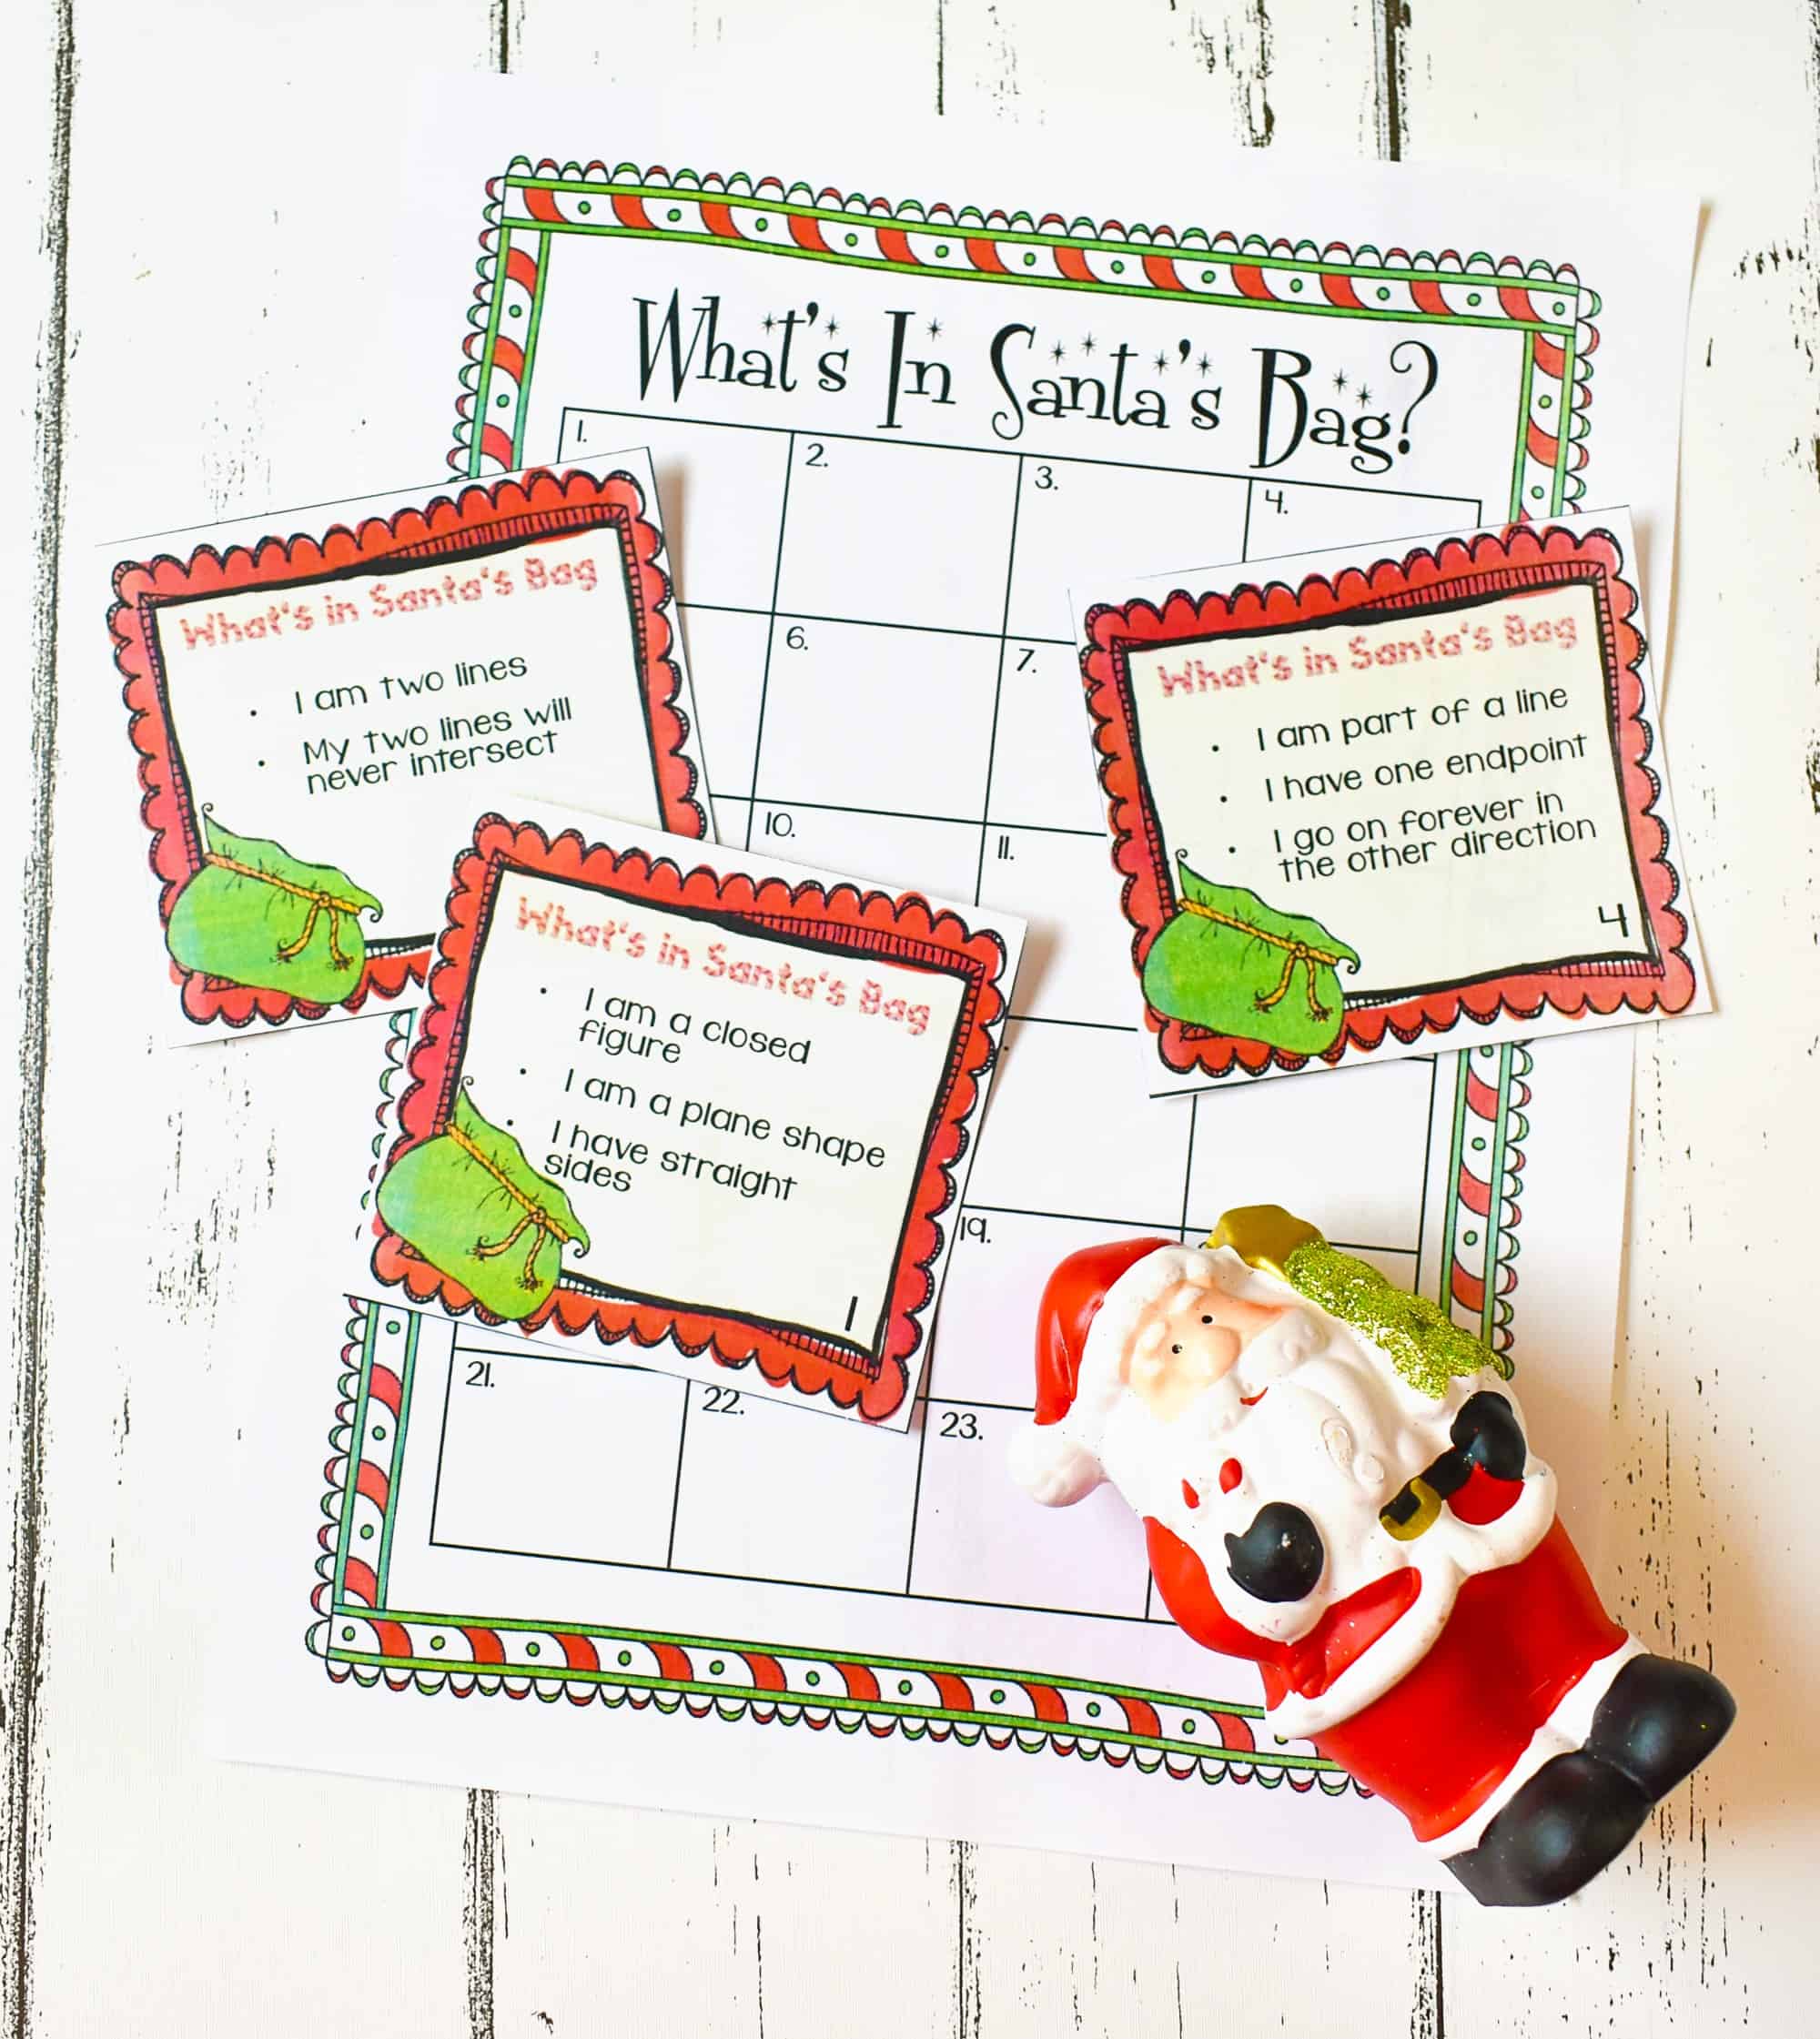 Need some fresh math centers around the winter holidays? I'm sharing a bunch of new Christmas math centers in this blog post! These activities are perfect for a 3rd grade, 4th grade, or 5th grade math classroom. They help your upper elementary students practice Common Core math concepts in engaging and fun ways! Click through to learn more about these fun math centers.